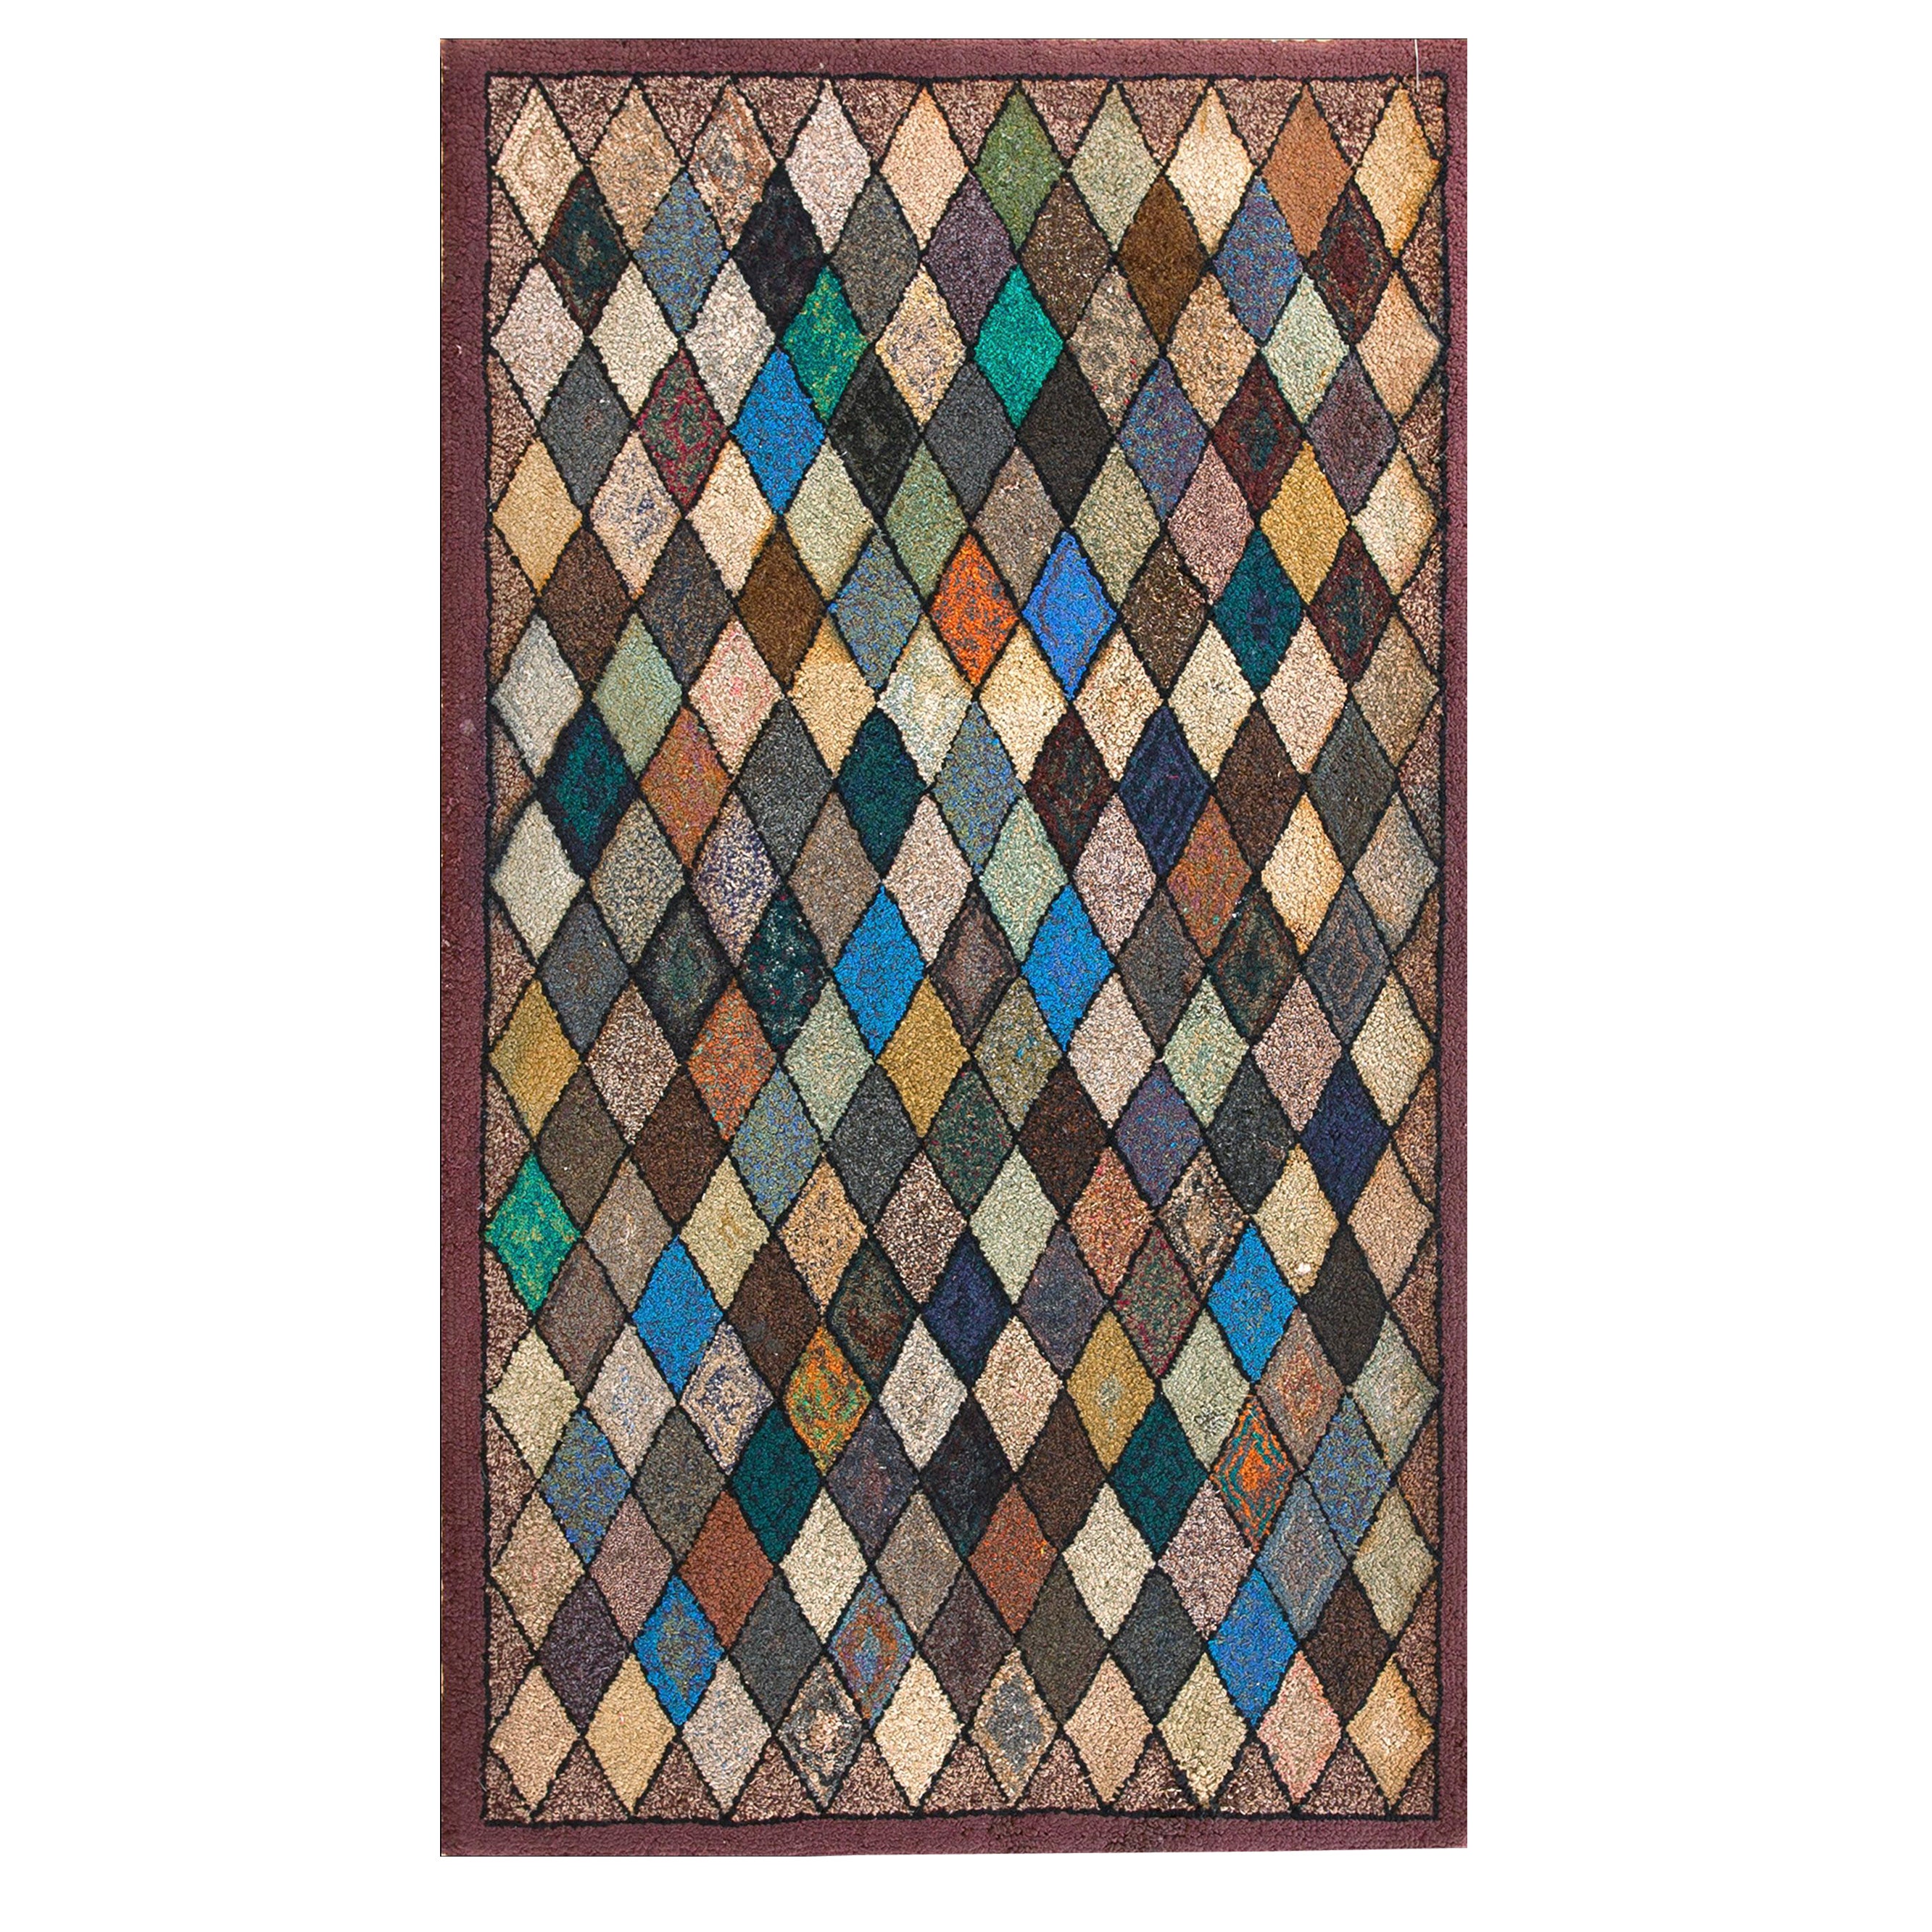 1930s American Hooked Rug ( 2'3" x 3'10" - 68 x 116 cm ) For Sale